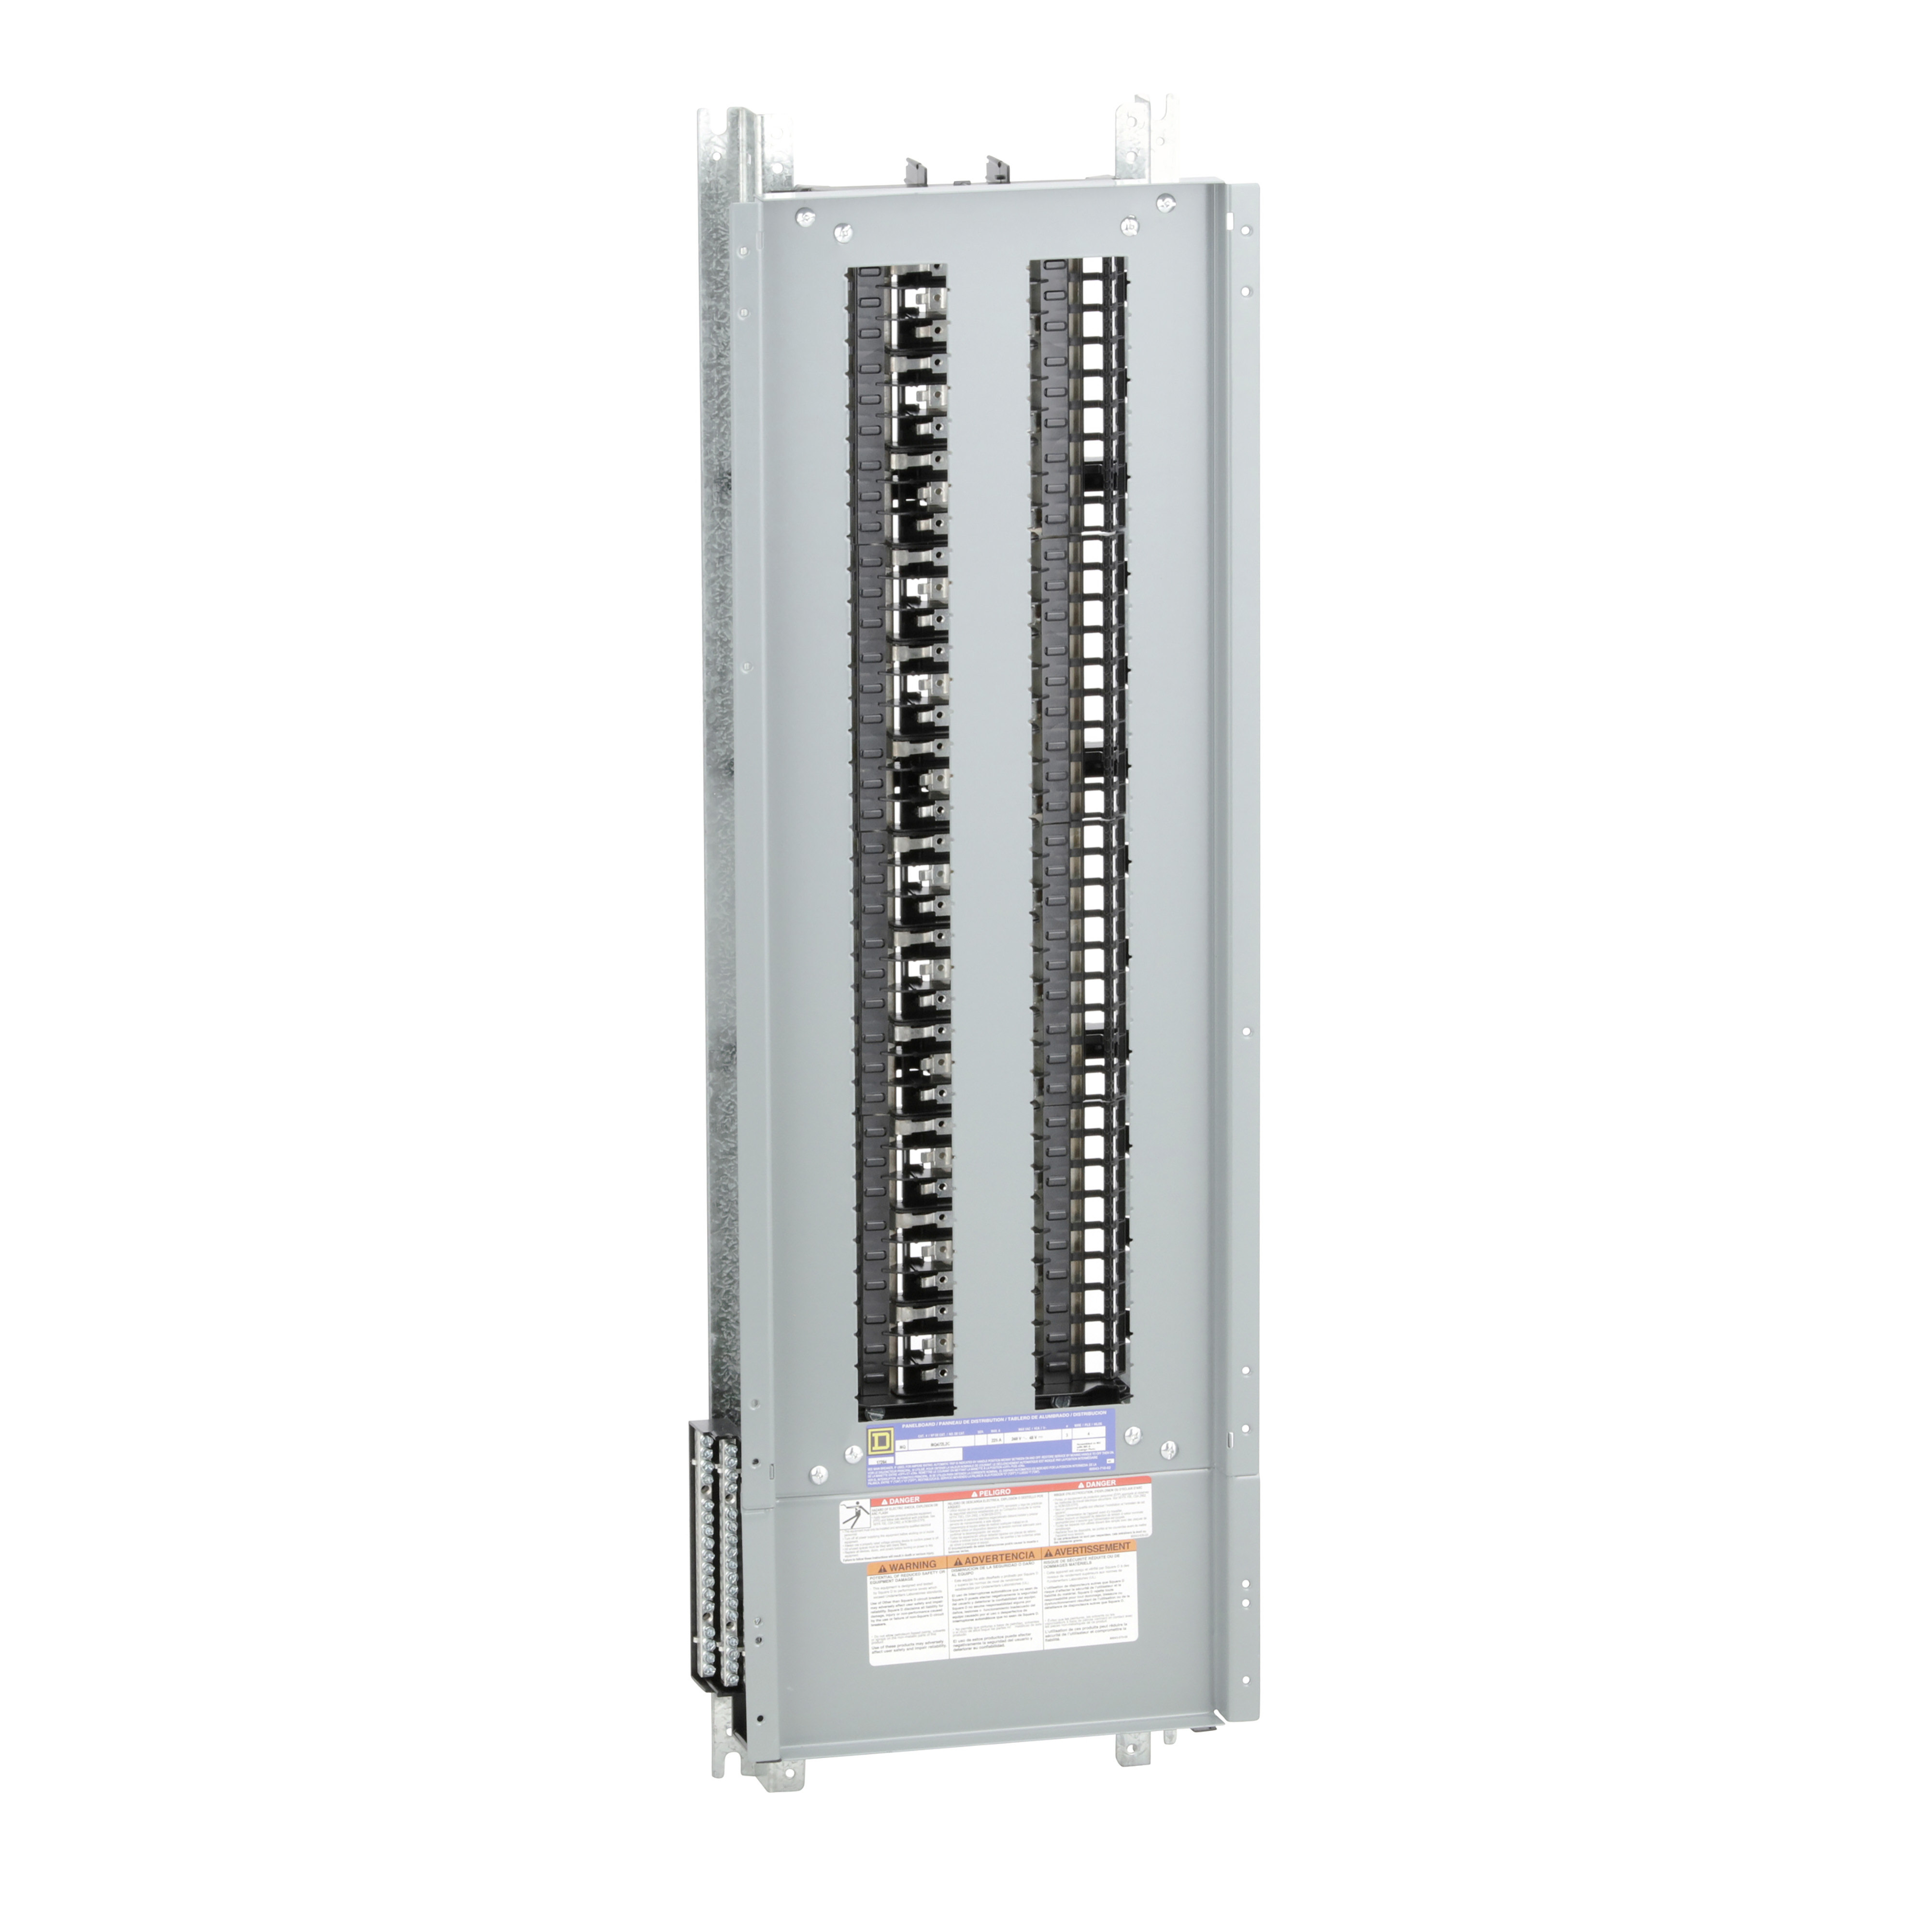 Panelboard interior, NQ, main lugs, 225A, Cu bus, 72 pole spaces, 3 phase, 4 wire, 240VAC, 48VDC